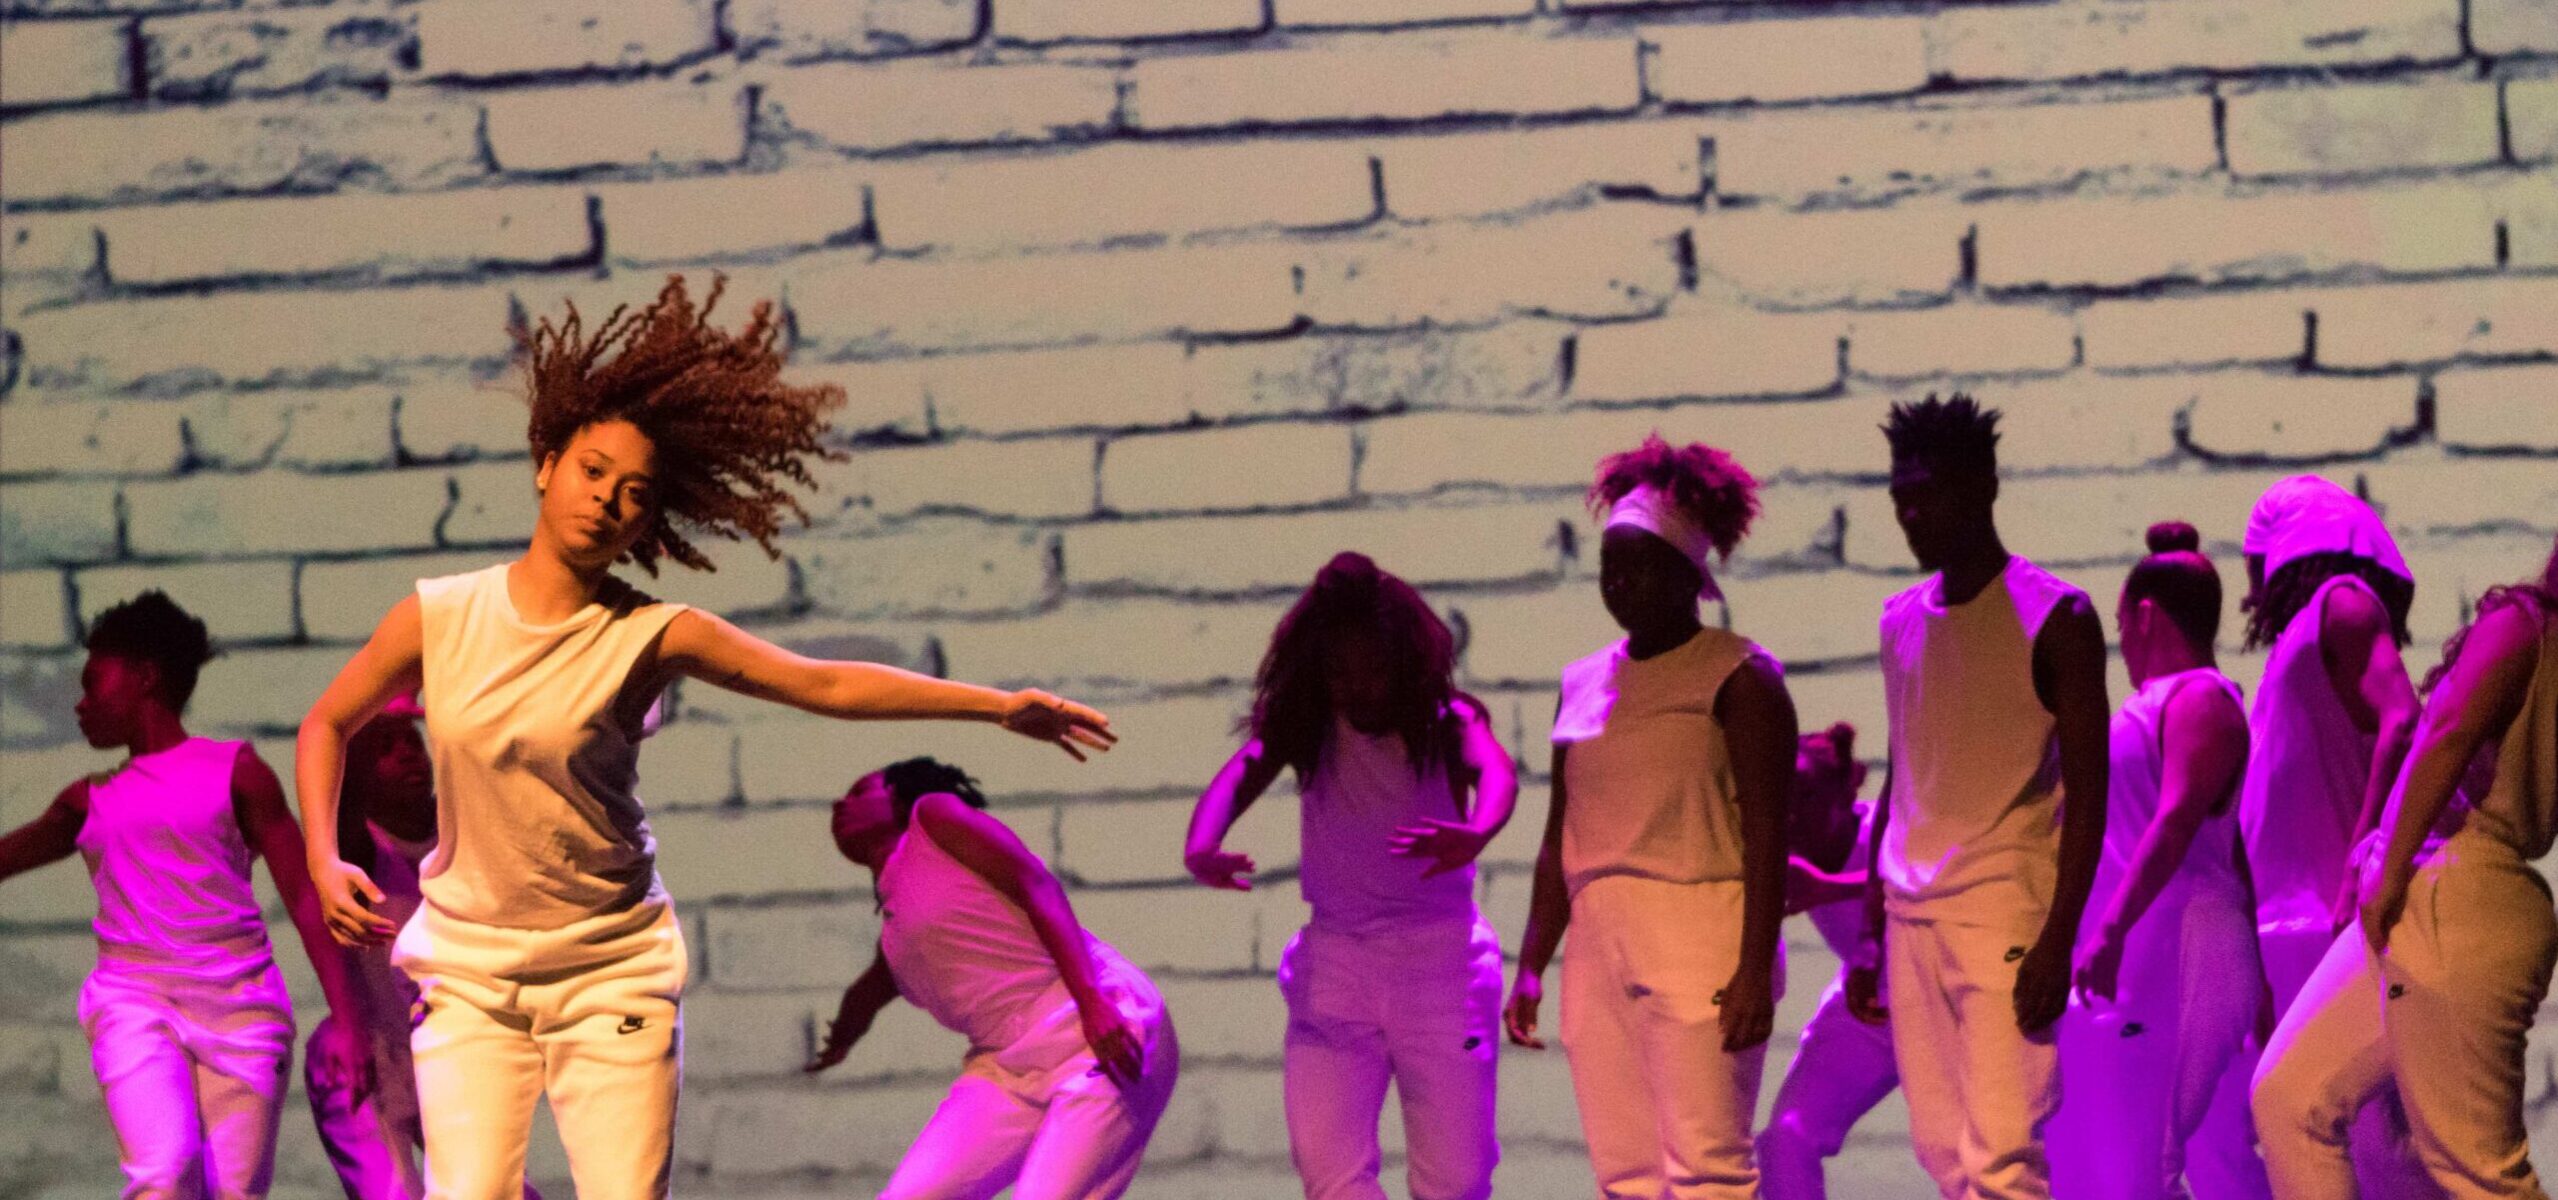 A dancer with left arm outstretched and hair flying dances in front of a group